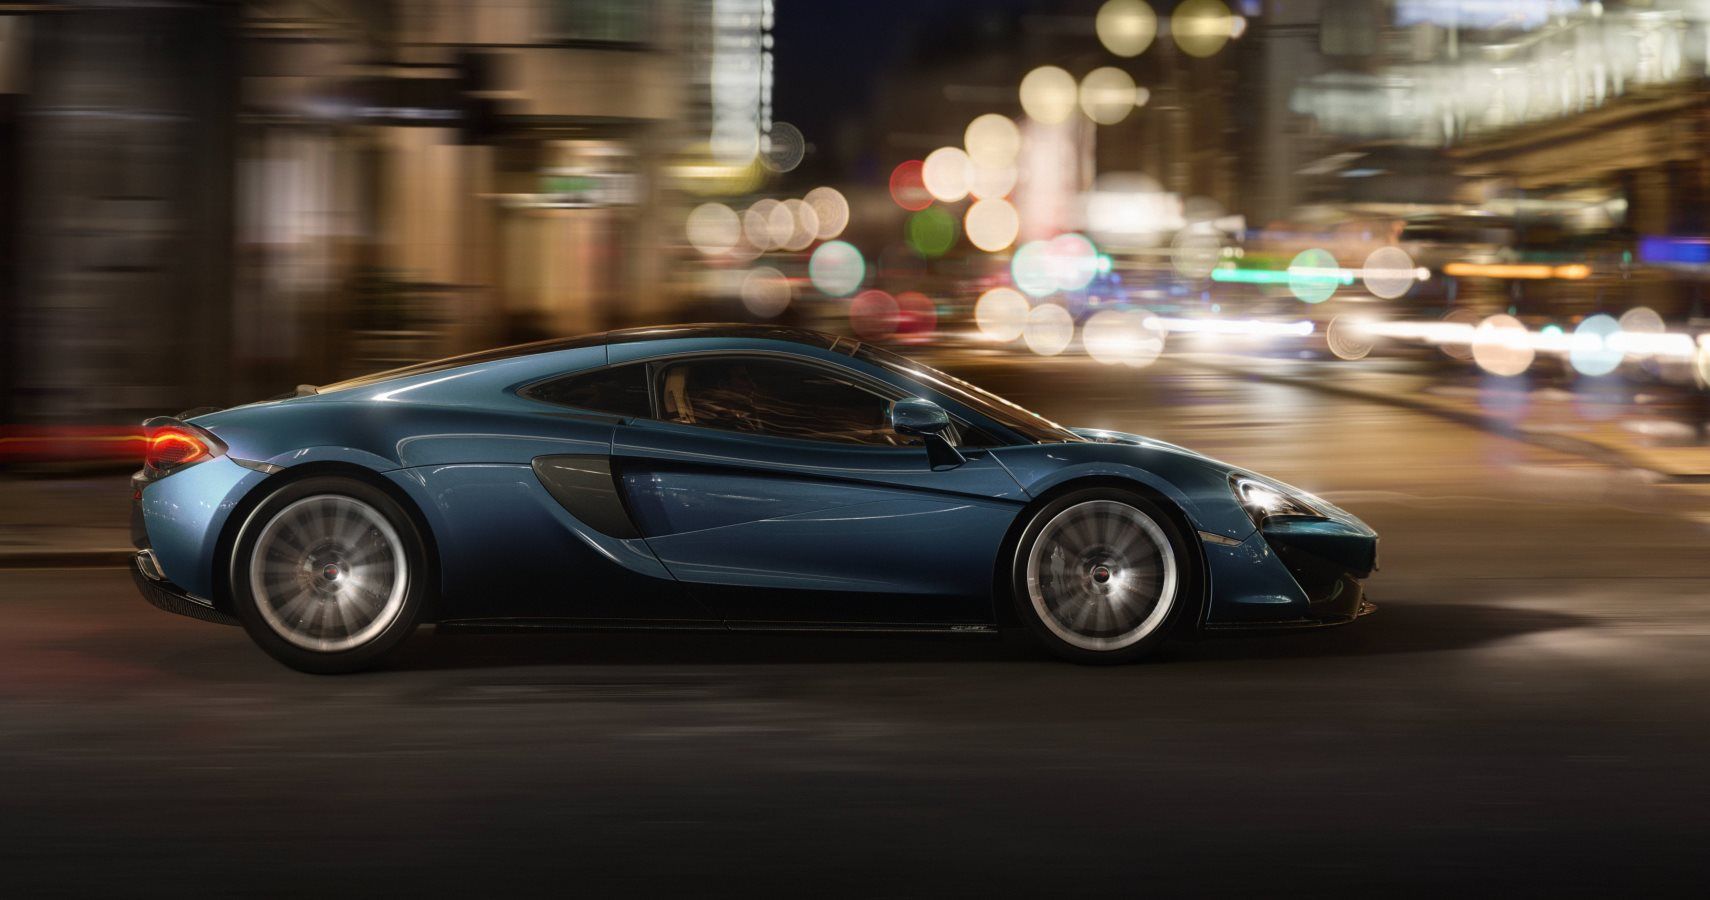 Review: McLaren 570GT Sport Pack - Riding The Line Between Performance And Luxury